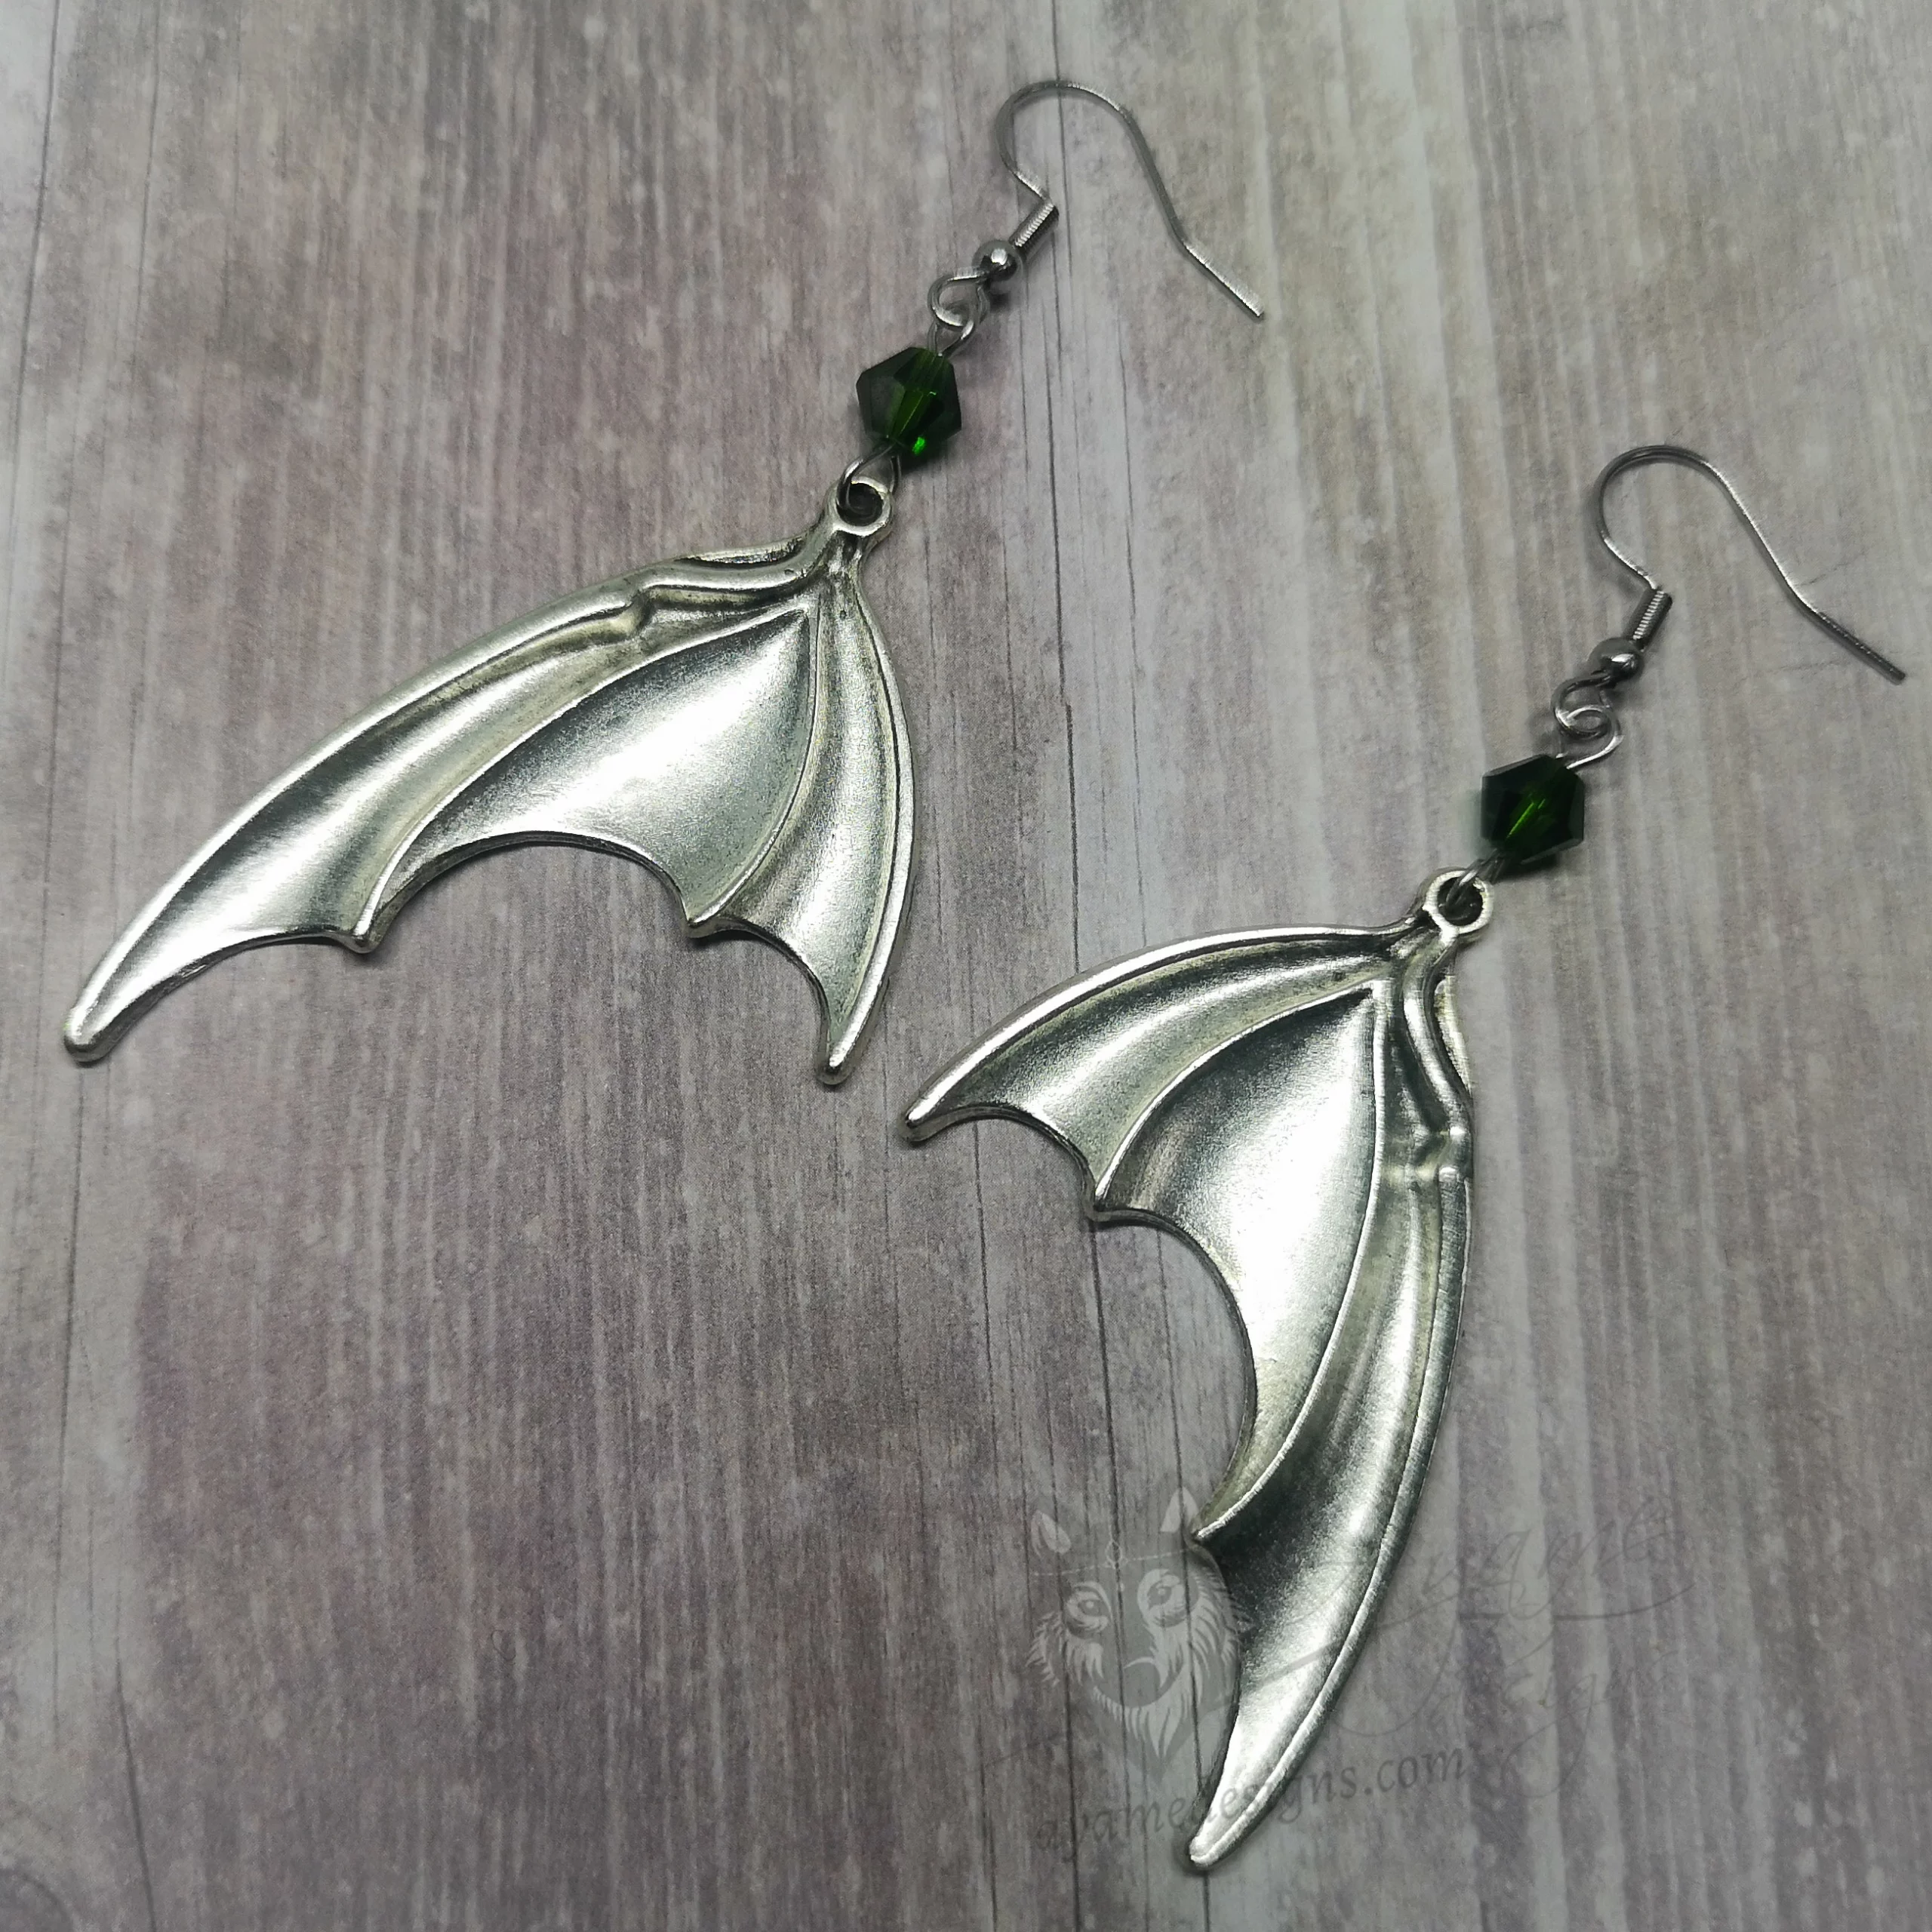 Handmade gothic earrings with large silver bat wings and green Austrian crystal beads on stainless steel earring hooks